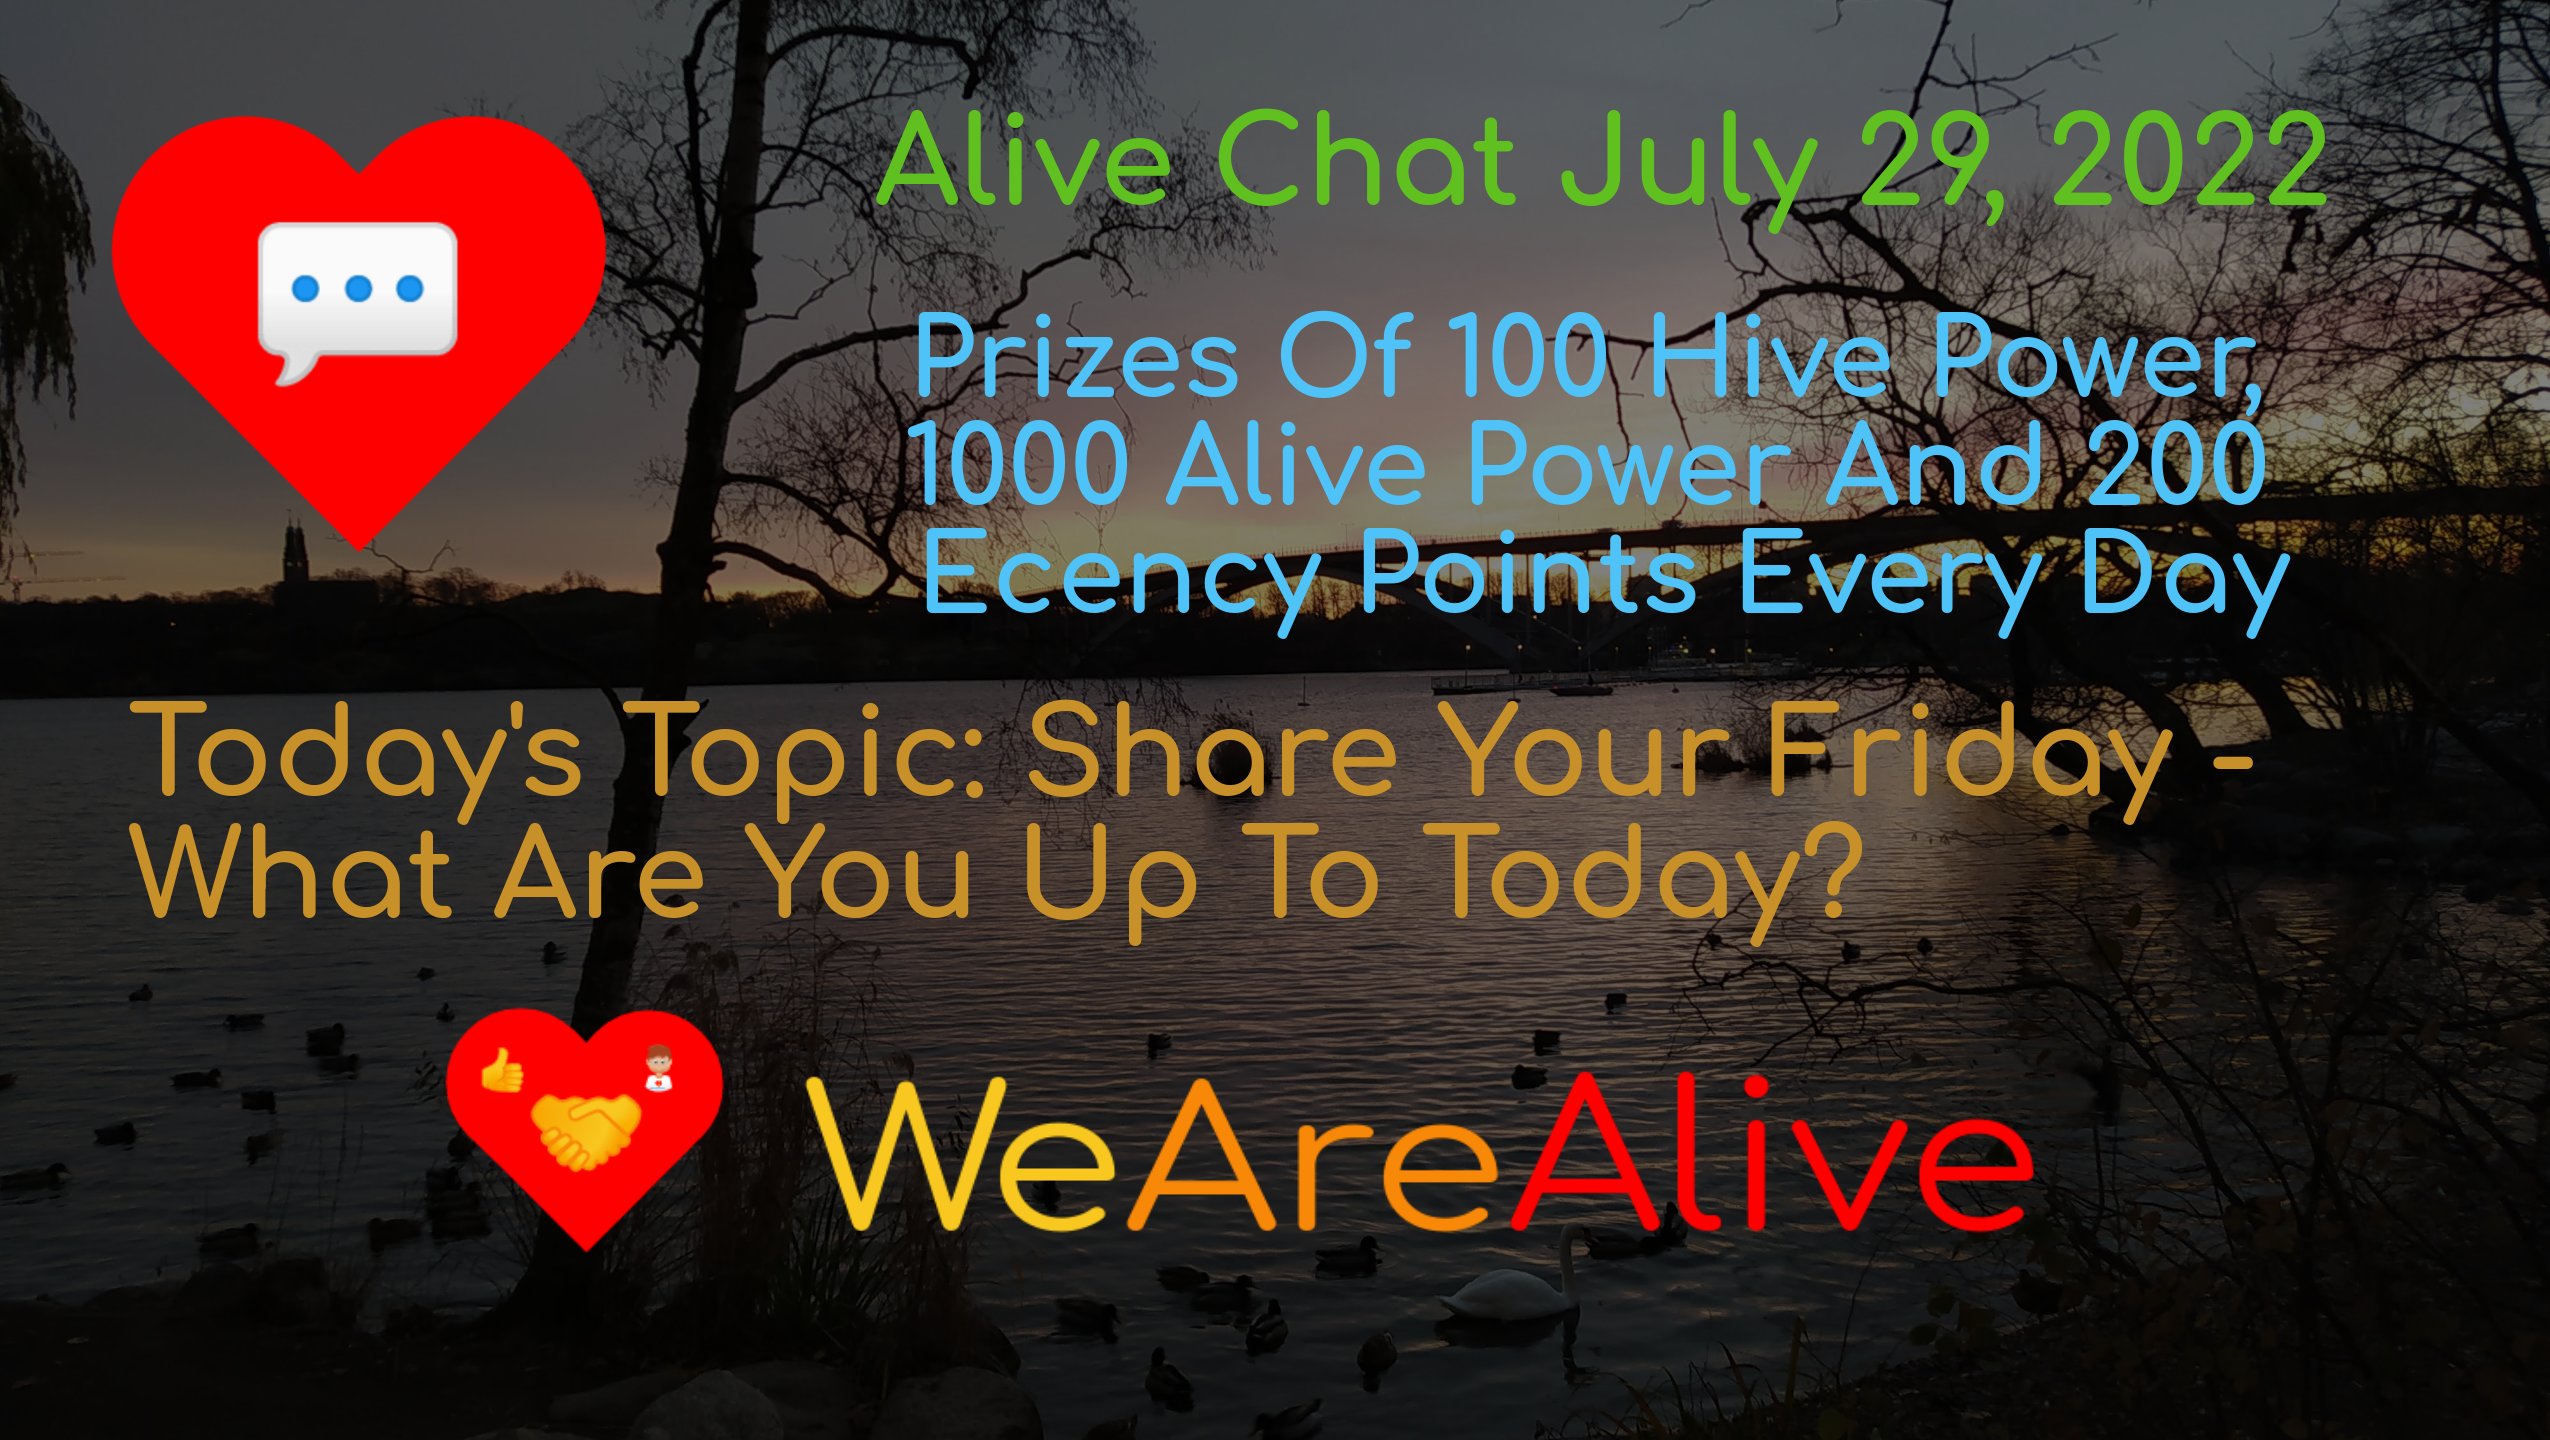 @alive.chat/alive-chat-july-29-2022-daily-prize-drawing-open-for-entries-todays-topic-share-your-friday-what-are-you-up-to-today